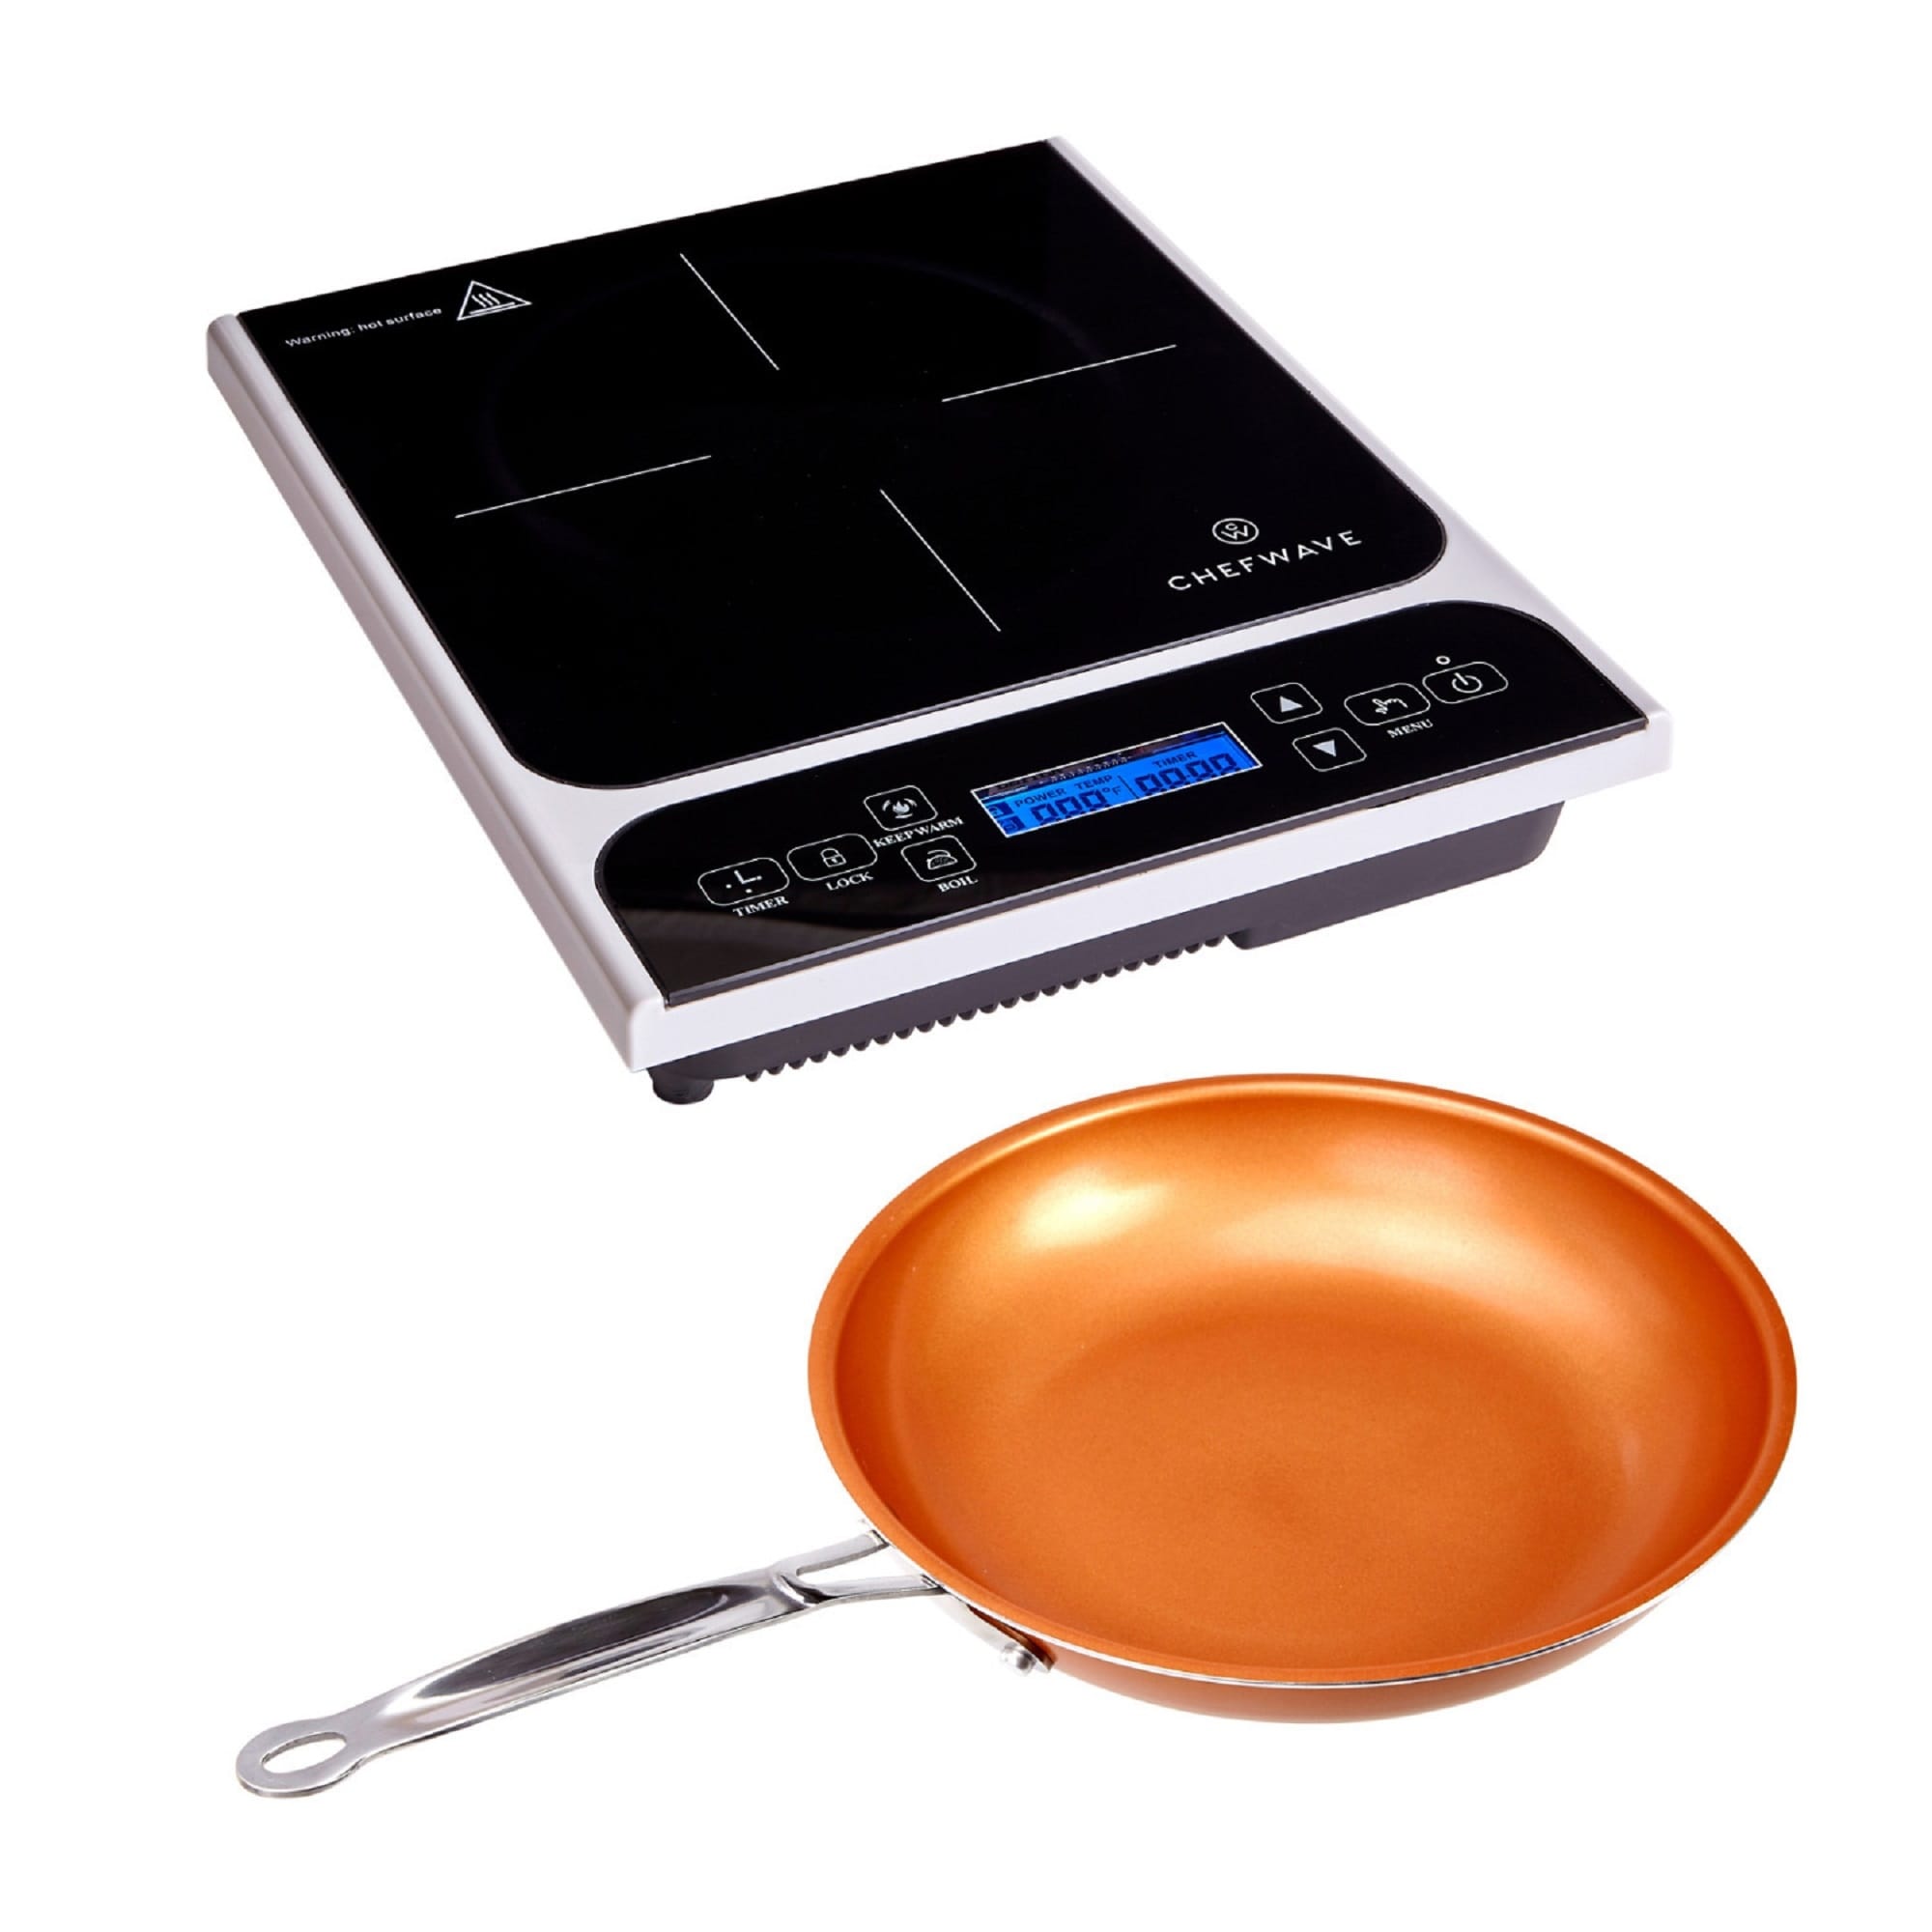 https://ak1.ostkcdn.com/images/products/is/images/direct/cc5763186f6026d817c45f3875cac17a2442eedc/ChefWave-LCD-1800W-Portable-Induction-Cooktop-with-Fry-Pan-Bundle.jpg